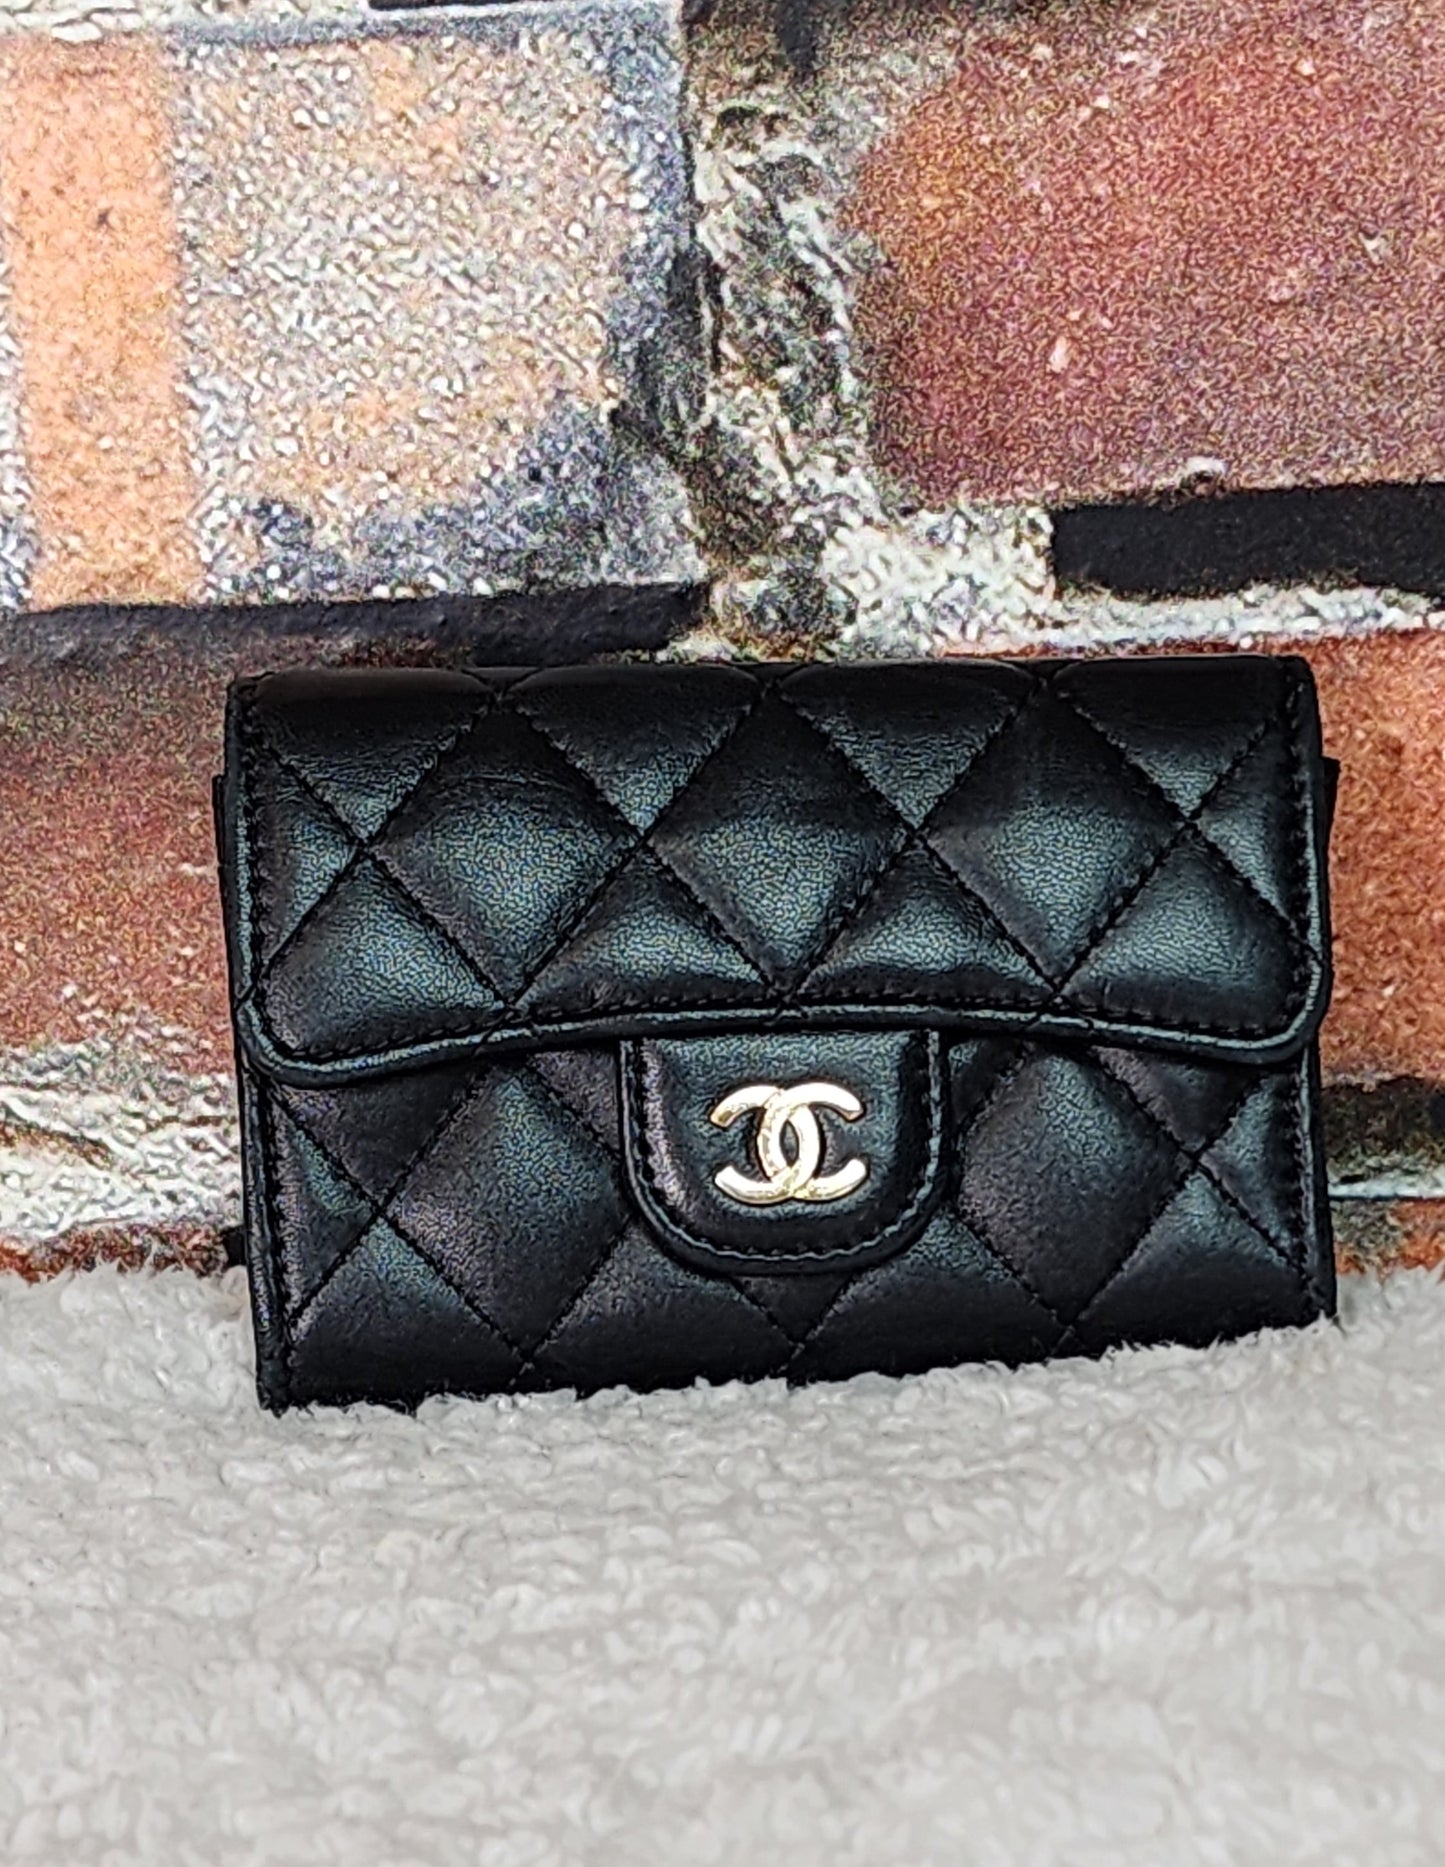 Pre-Loved Chanel Quilted Lambskin Coin Purse